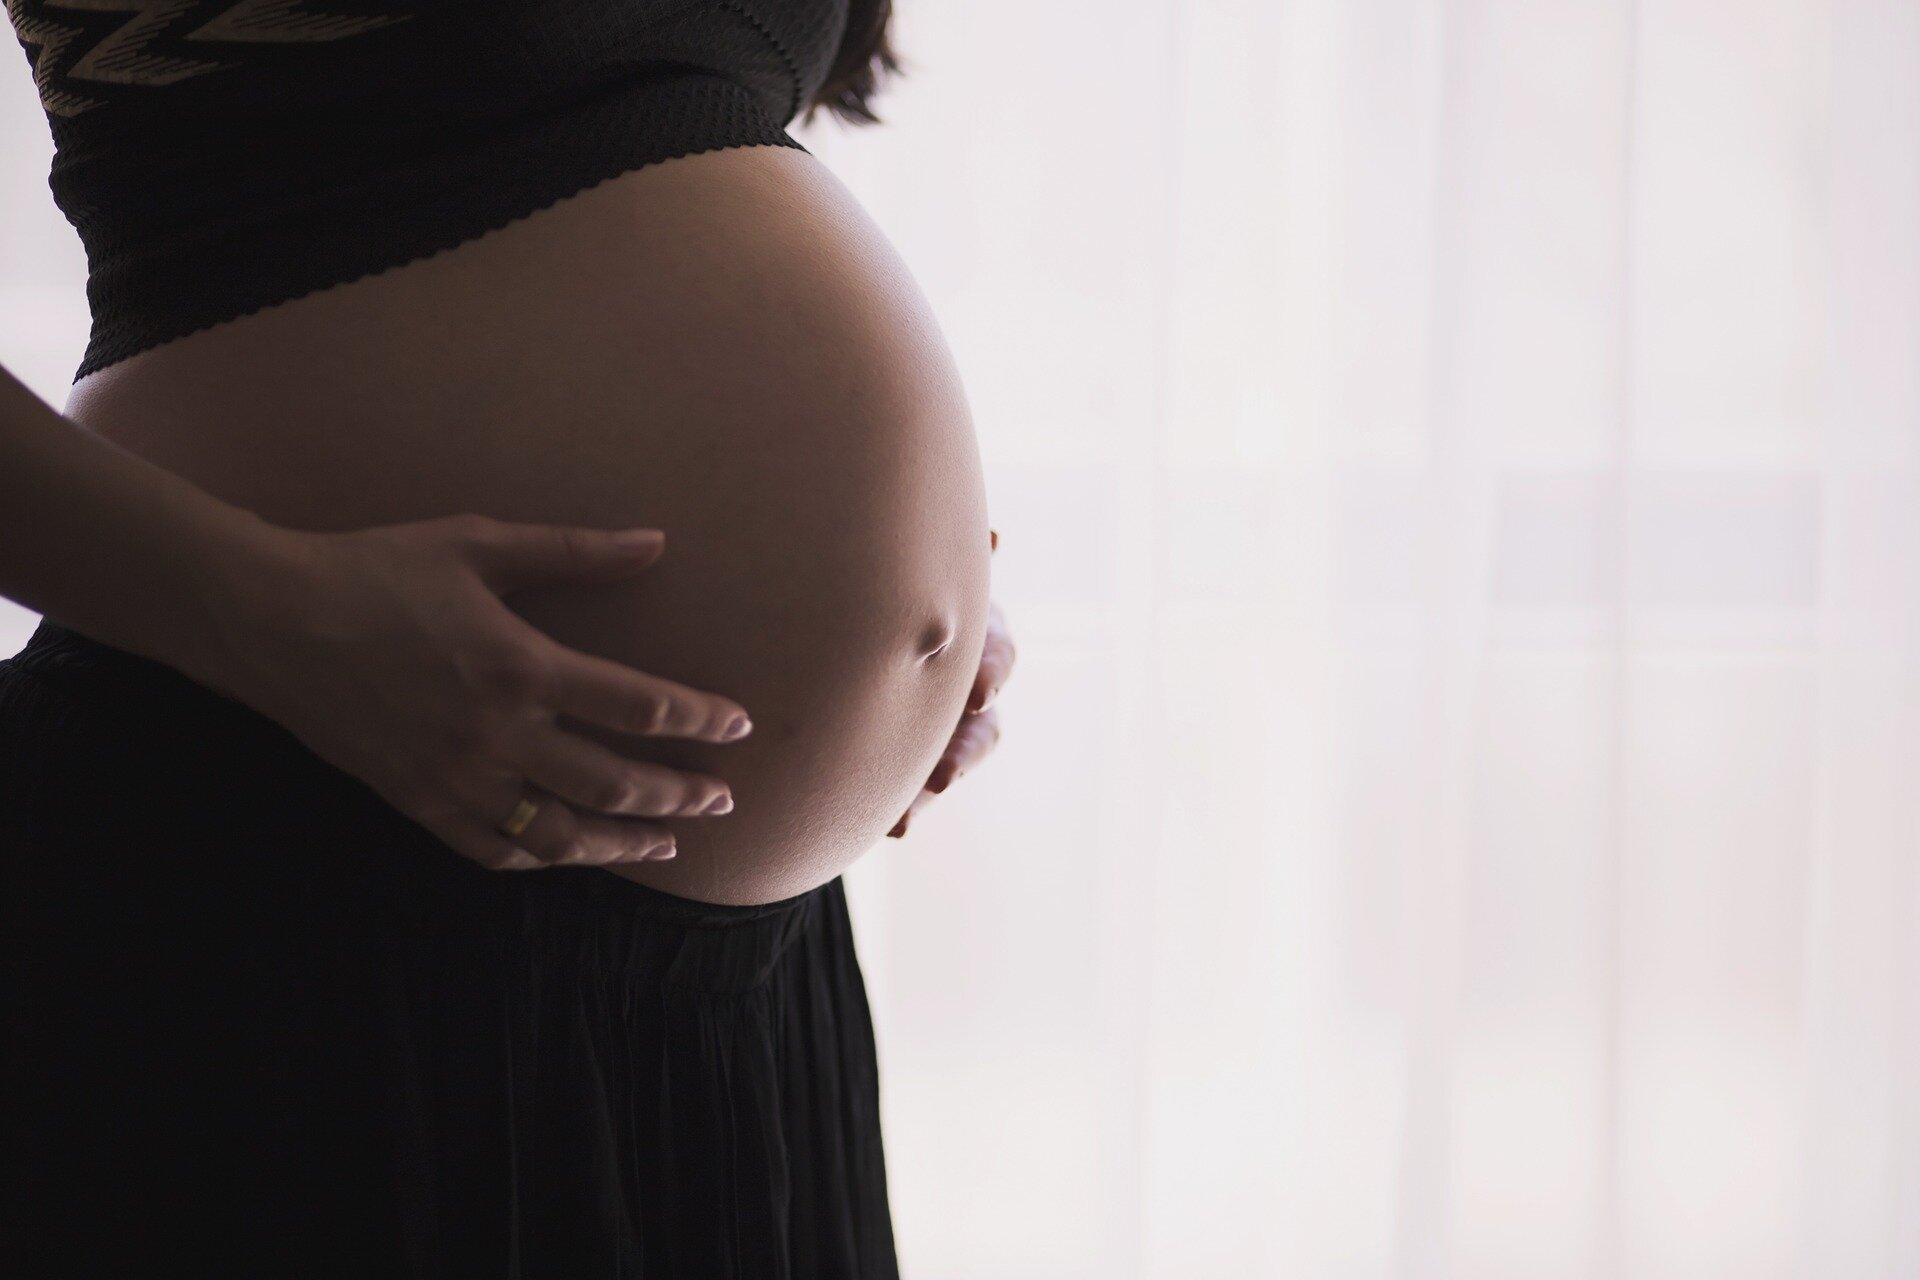 #A drug for pregnant women doesn’t work, according to the FDA. A company is selling it anyway